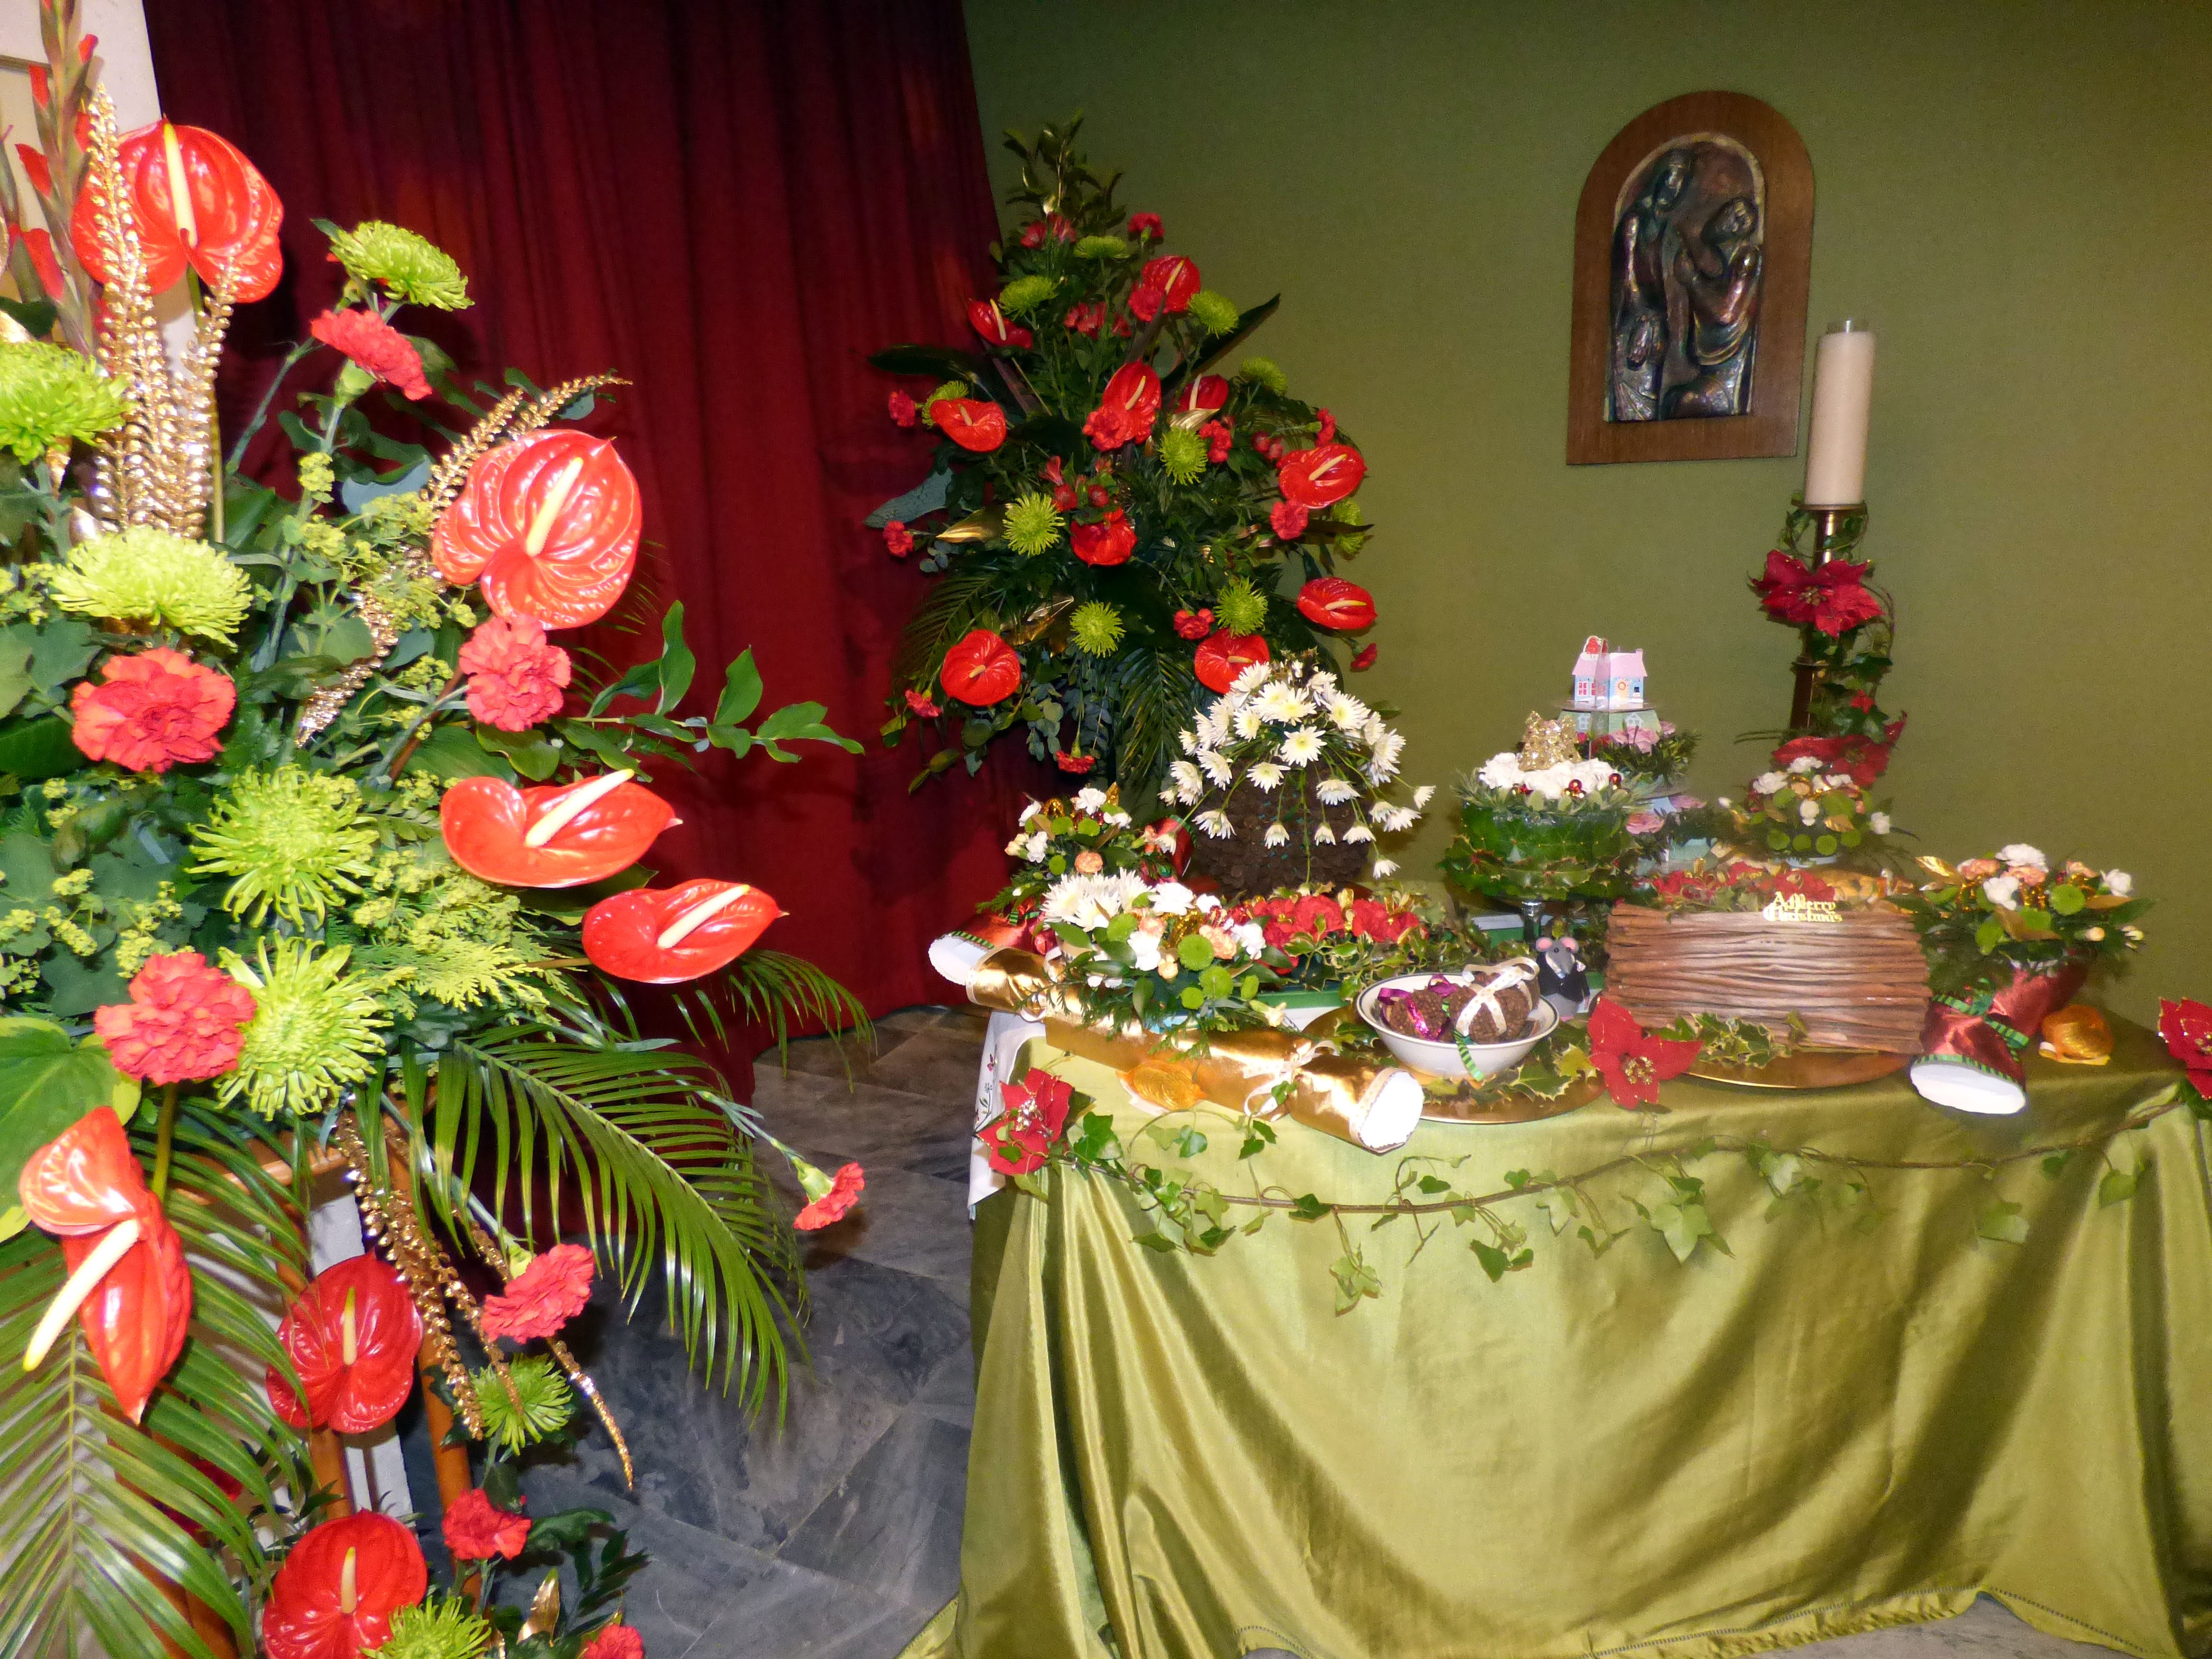 Step Into Christmas at Golden Jubilee Flower Festival, Liverpool Metropolitan Cathedral 2017